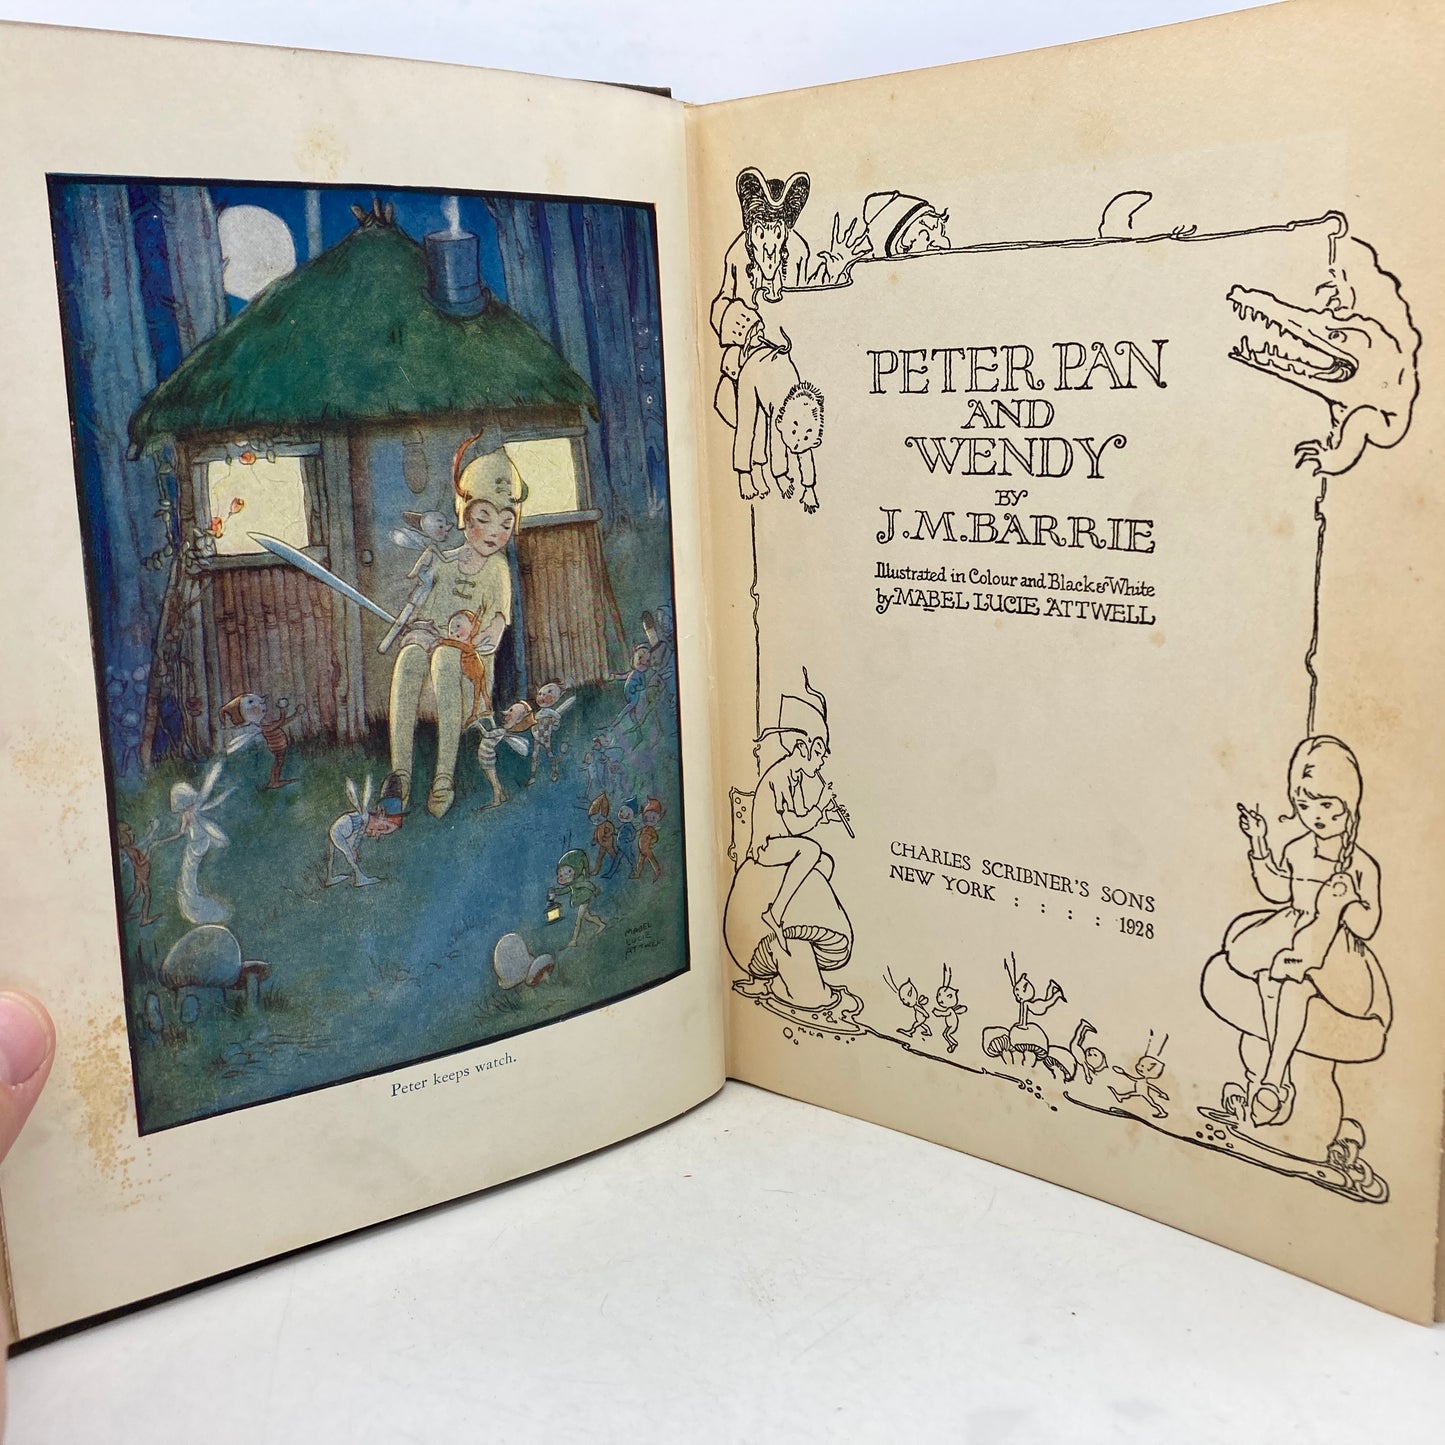 BARRIE, J.M. "Peter Pan and Wendy" [Charles Scribner's Sons, 1928] - Buzz Bookstore